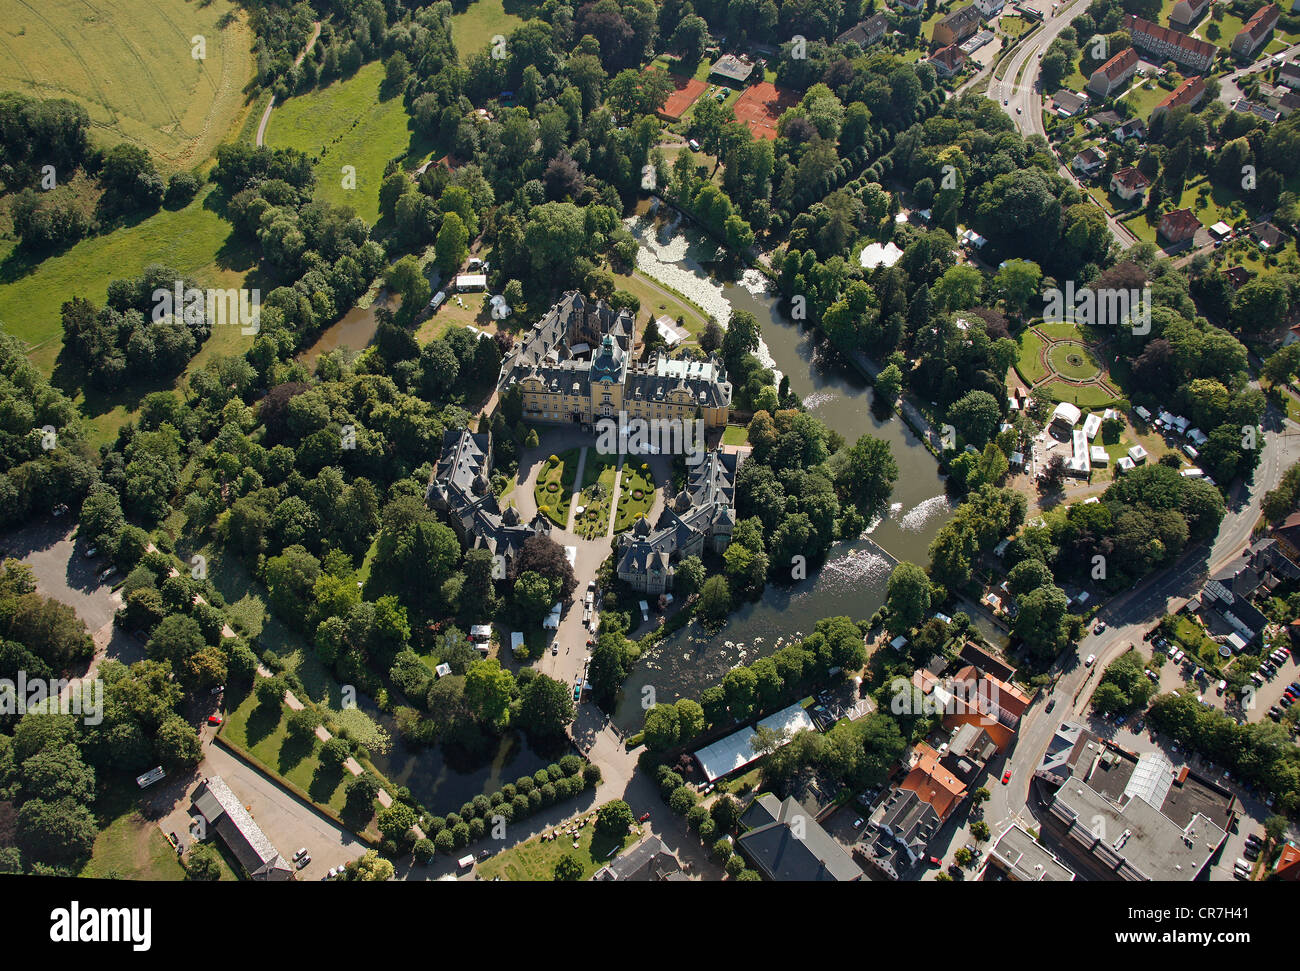 Aerial view, Bueckeburg castle, district of Schaumburg, Lower Saxony, Germany, Europe Stock Photo